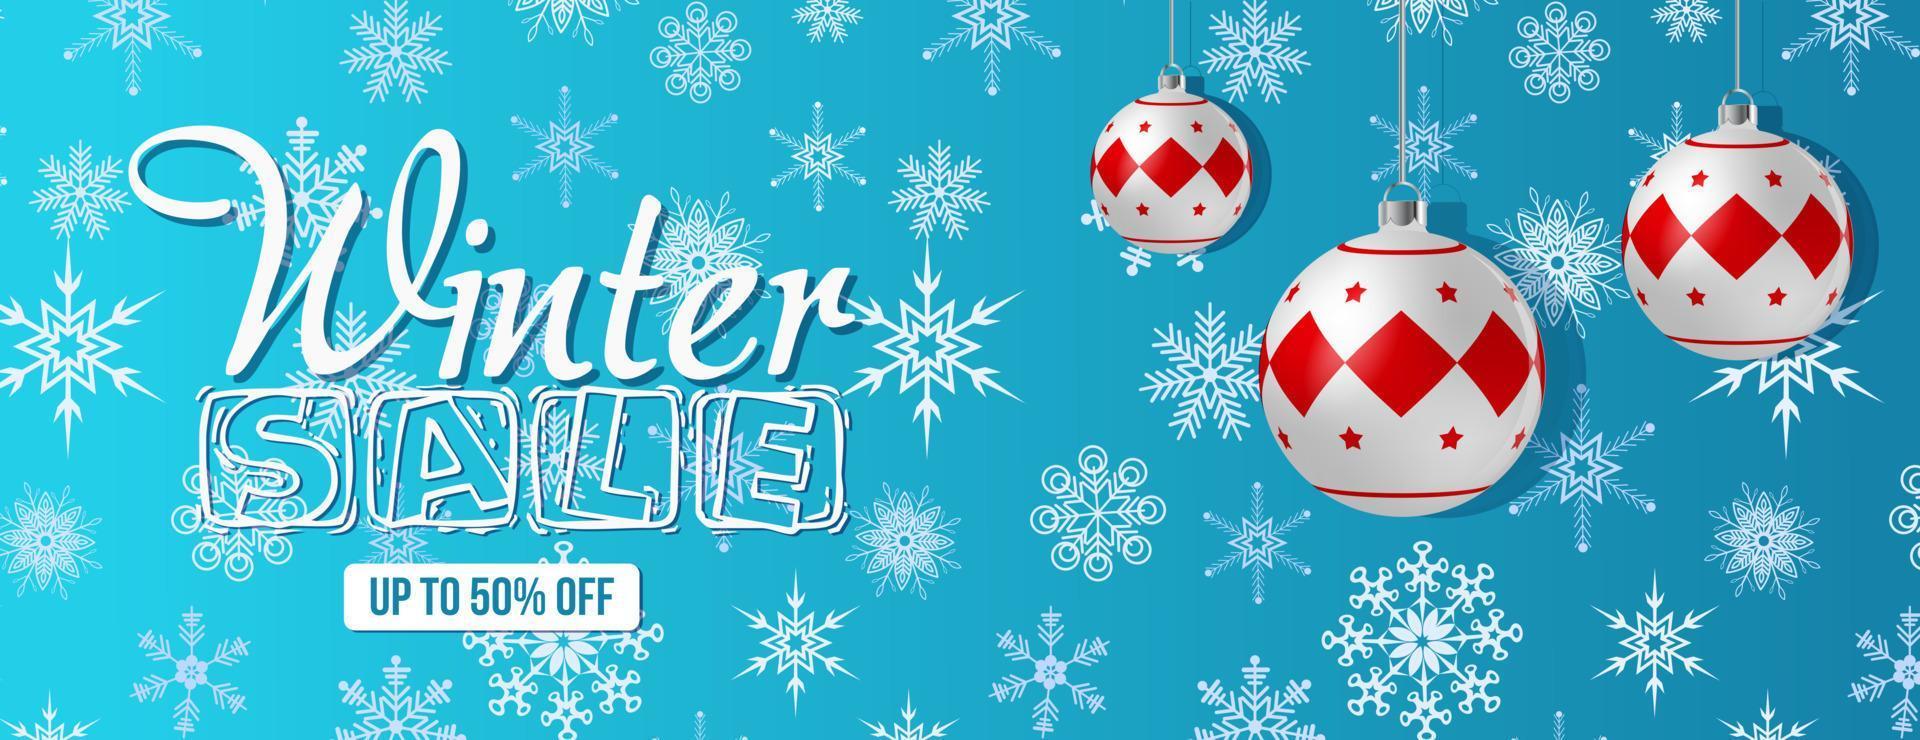 Winter sale banners Post template with snowy background vector